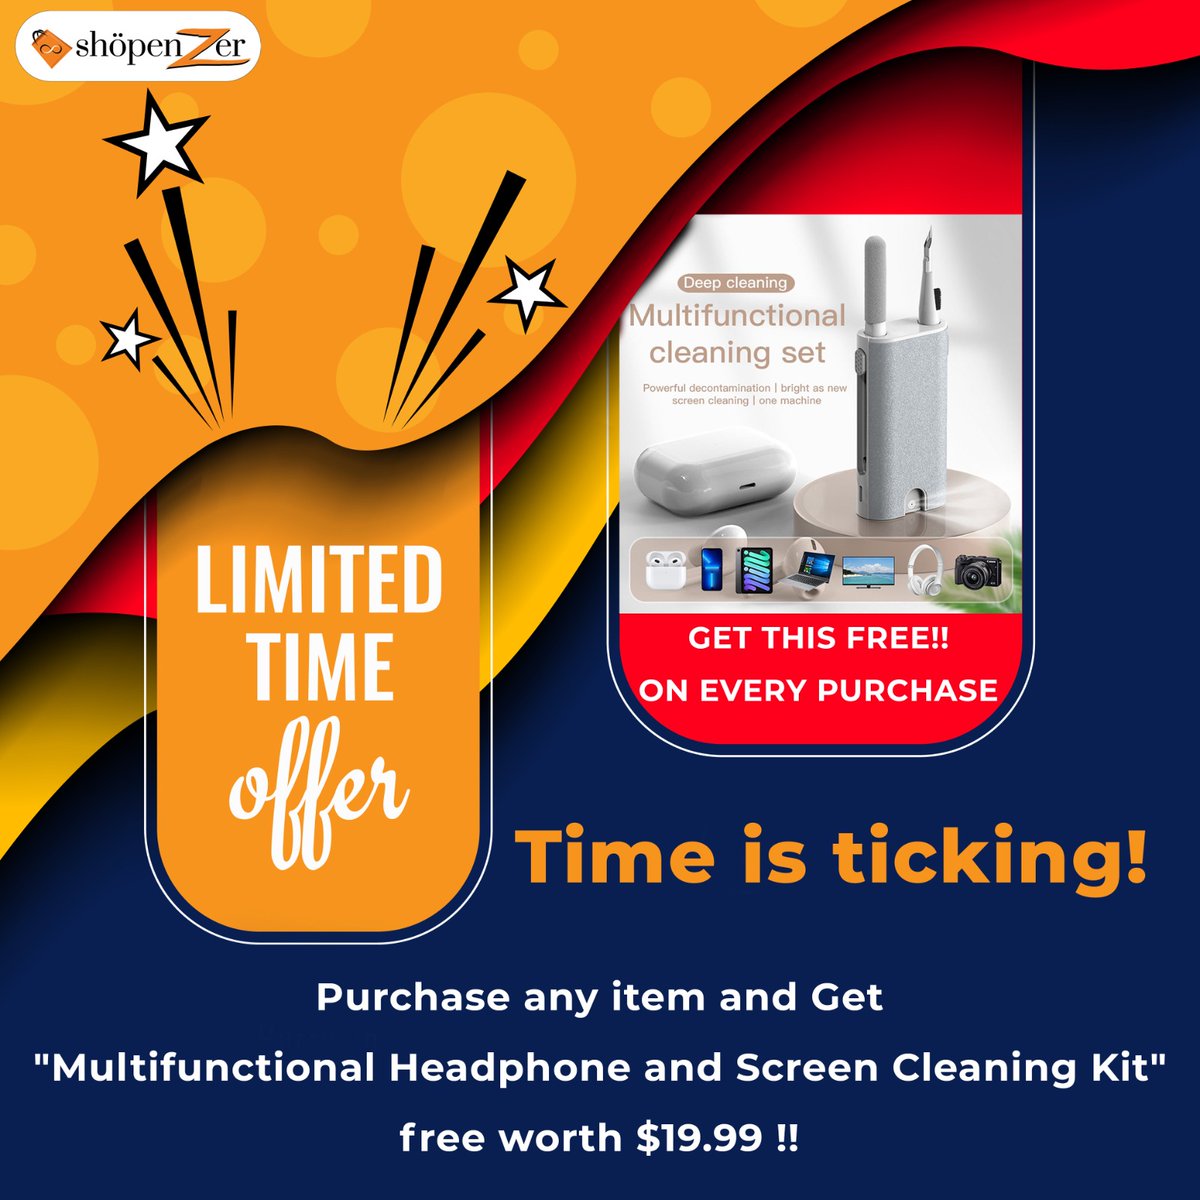 This offer is for limited time ❤ So what are you waiting for?? Place your order here and get this one for free🎁🎁: shopenzer.com/?ref=sztw #shopenzer #shopenzerinc